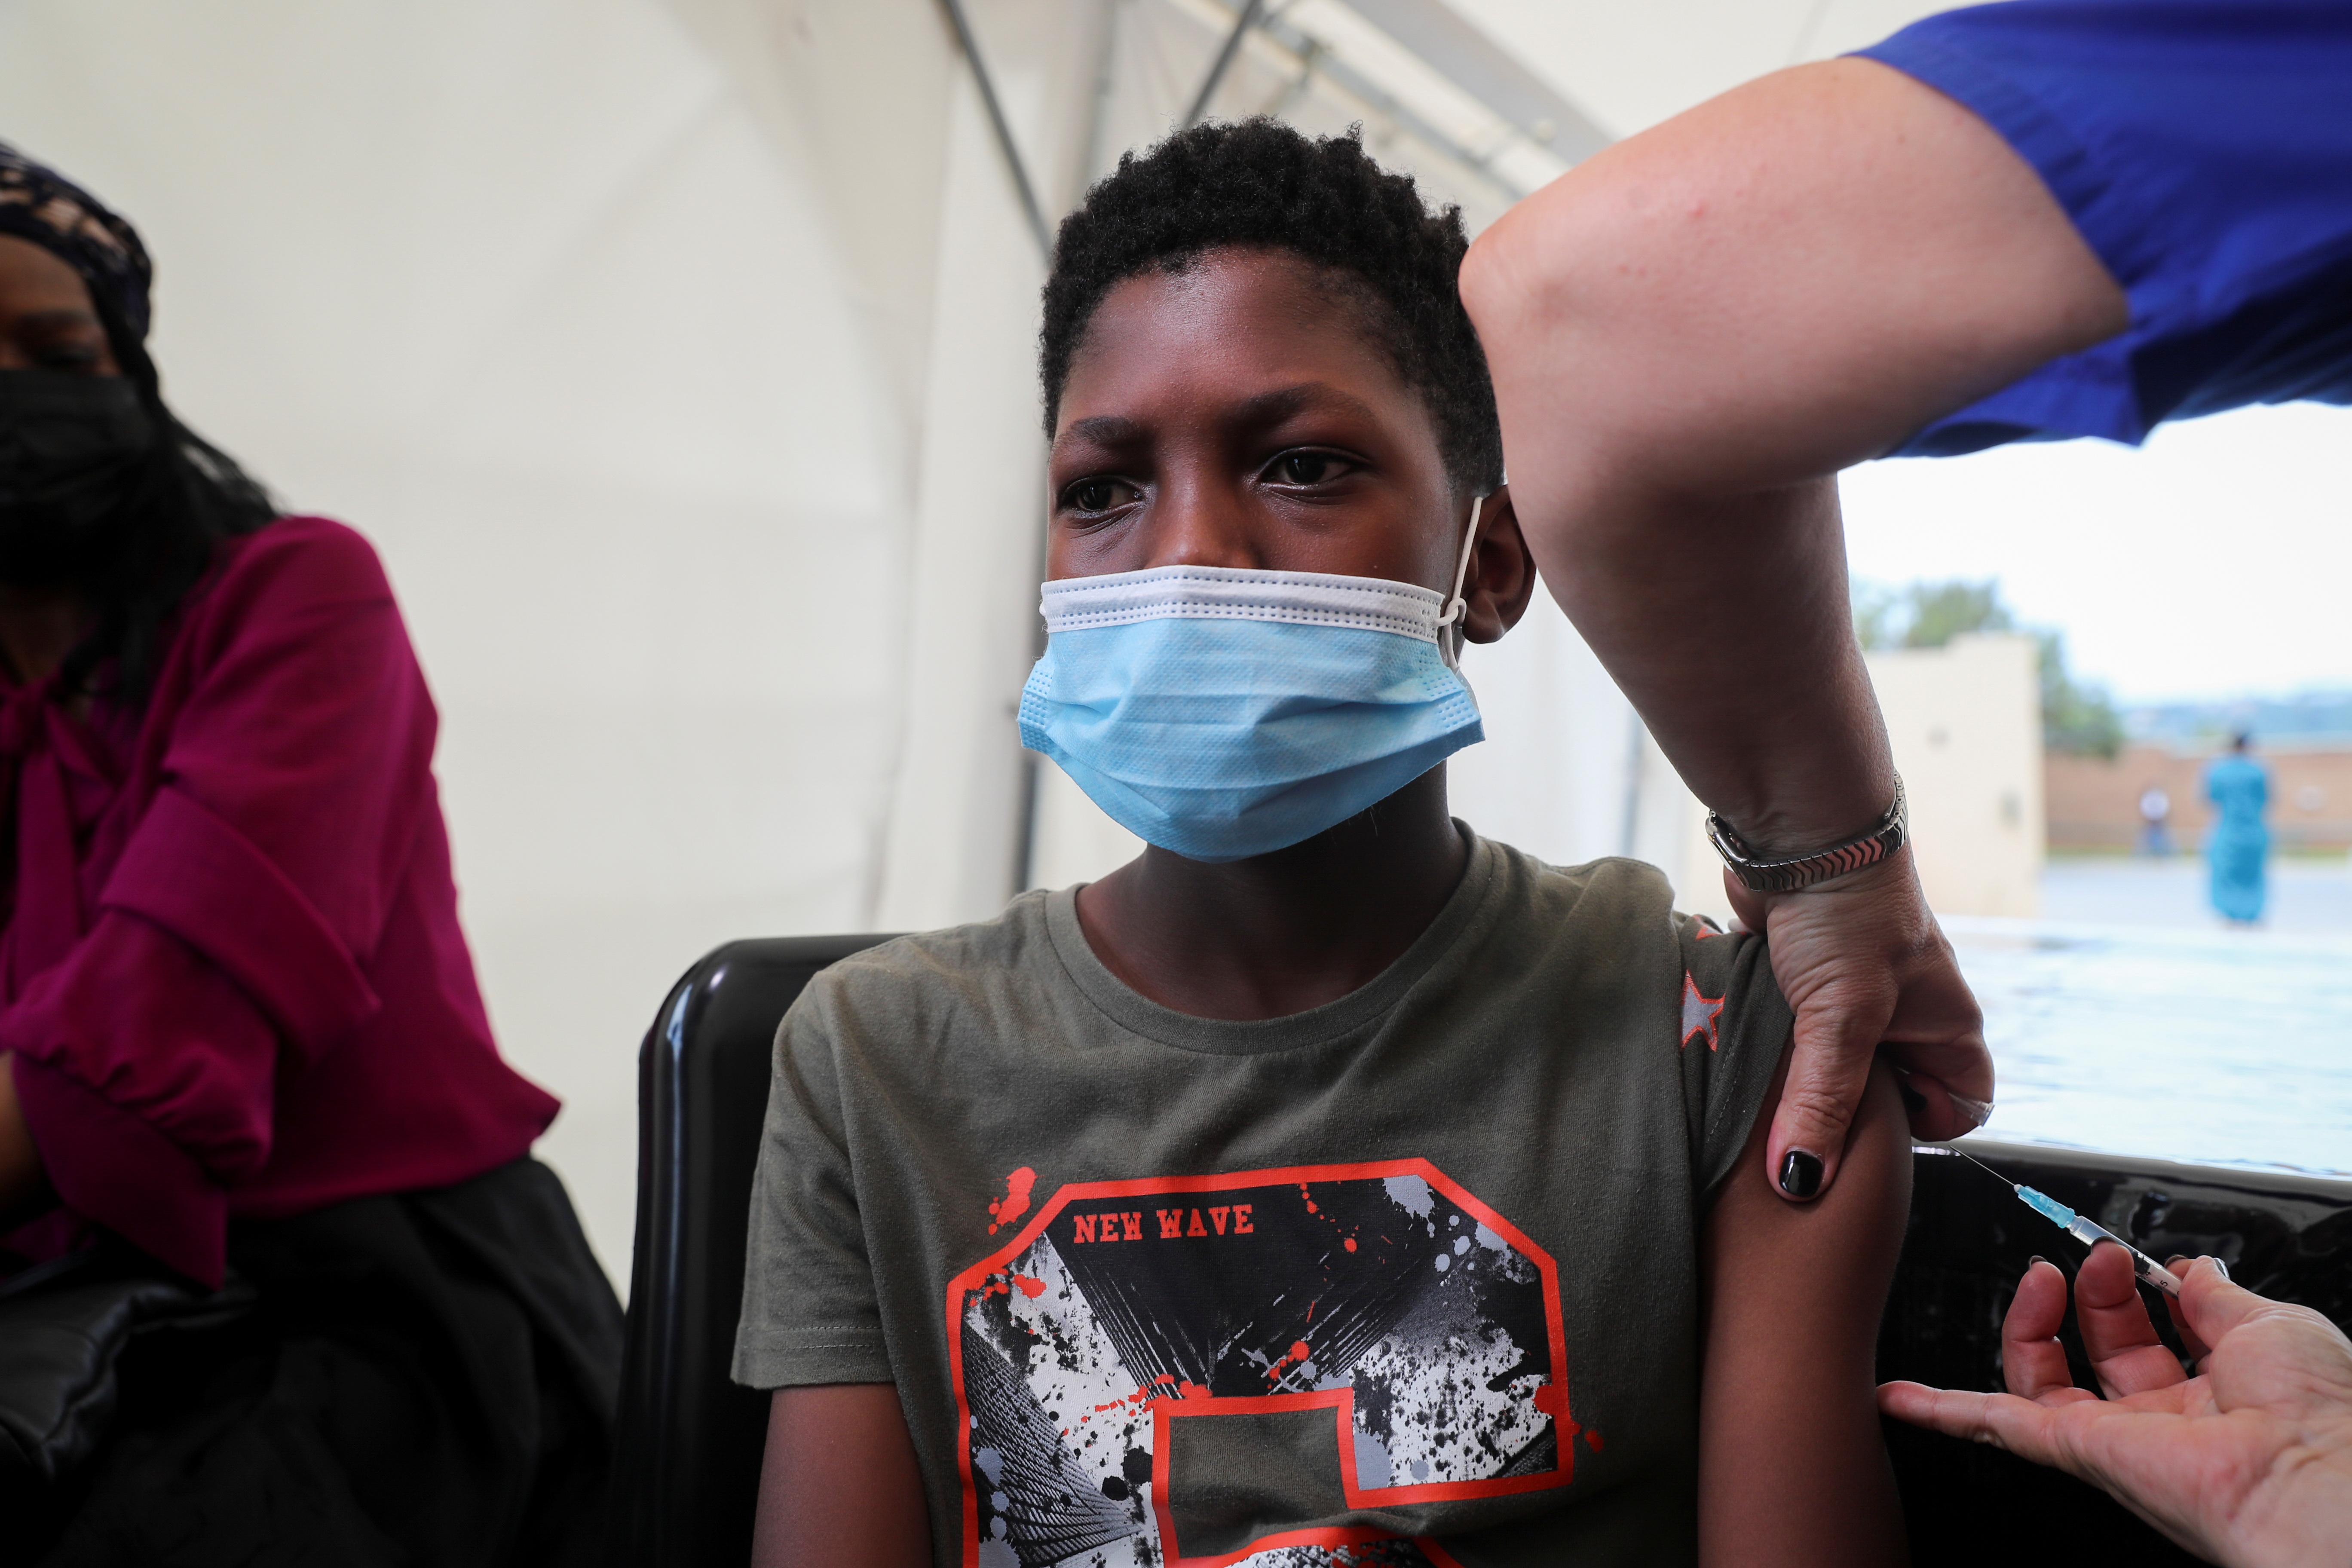 A healthcare worker administers the Pfizer coronavirus disease (COVID-19) vaccine to Simphiwe, 13, amidst the spread of the SARS-CoV-2 variant Omicron in Johannesburg, South Africa, December 04, 2021. REUTERS/Sumaya Hisham